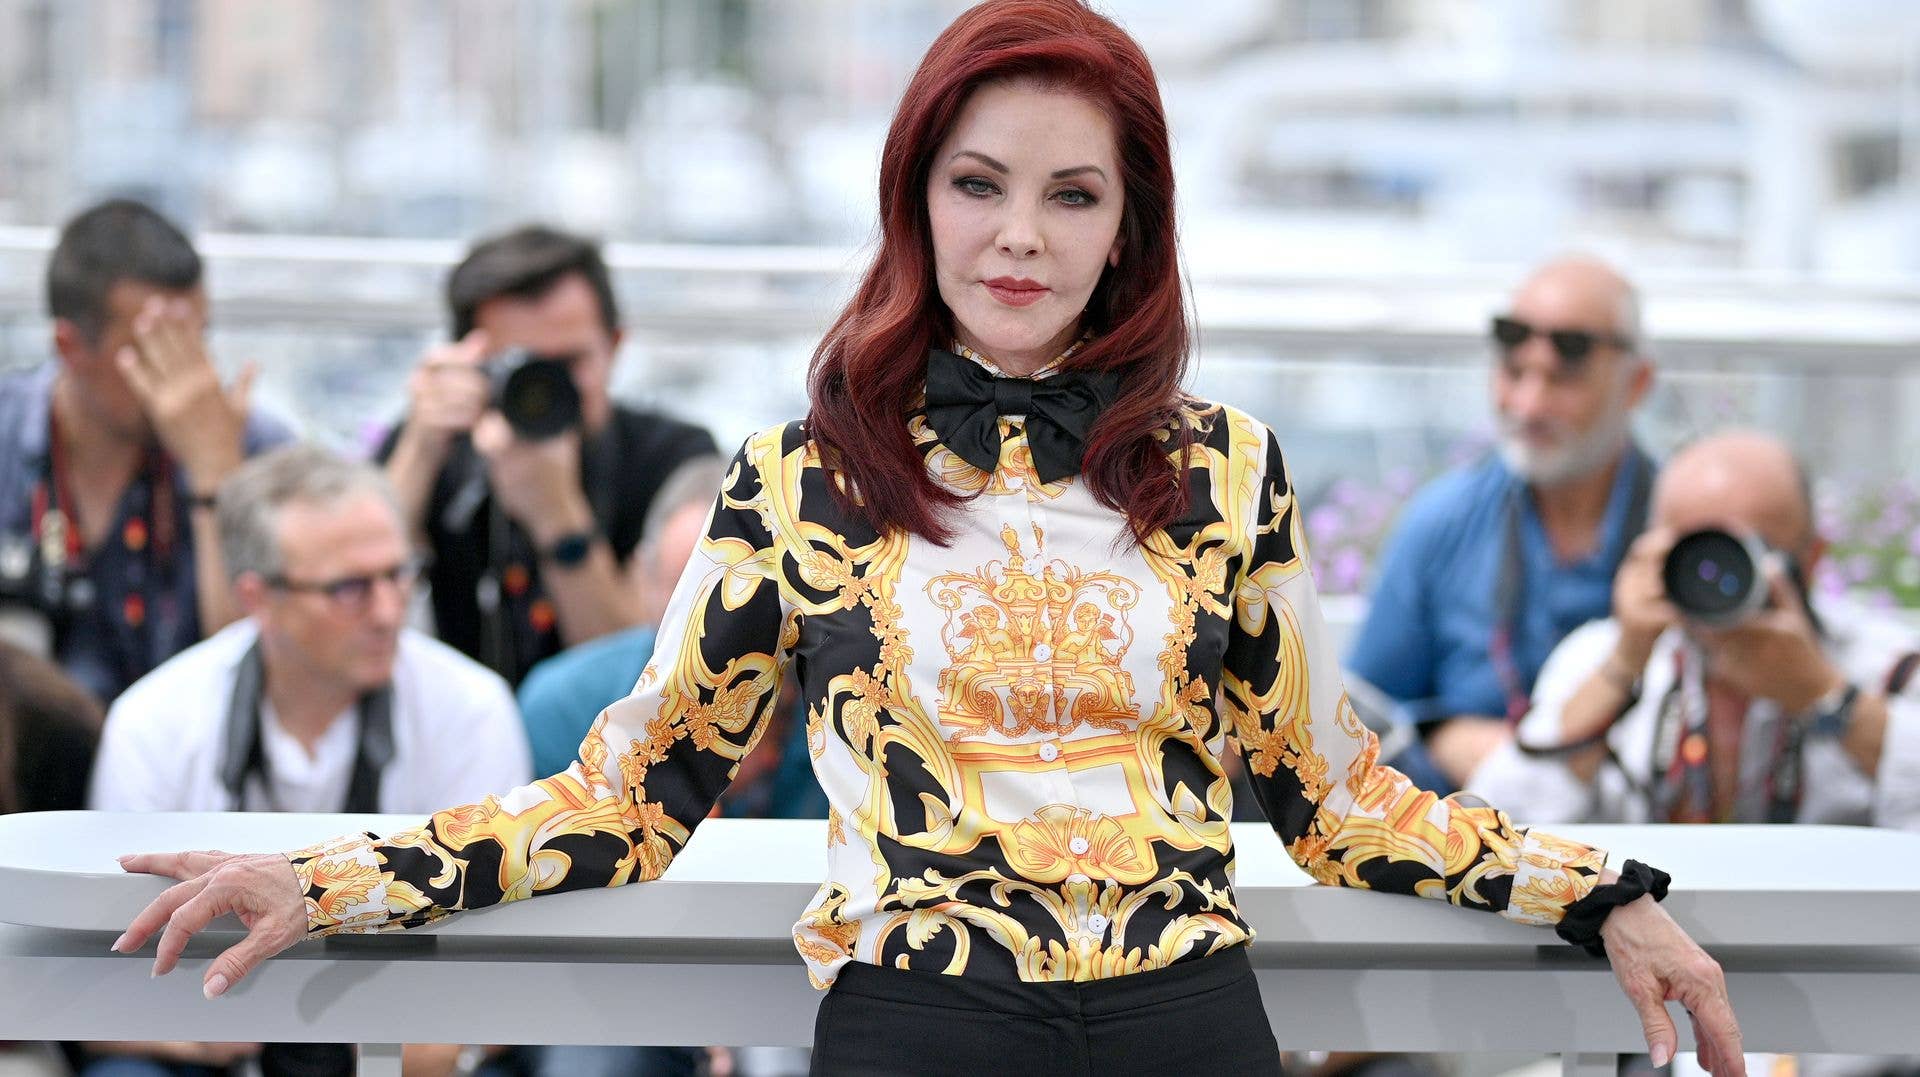 Priscilla Presley attends the photocall for "Elvis"